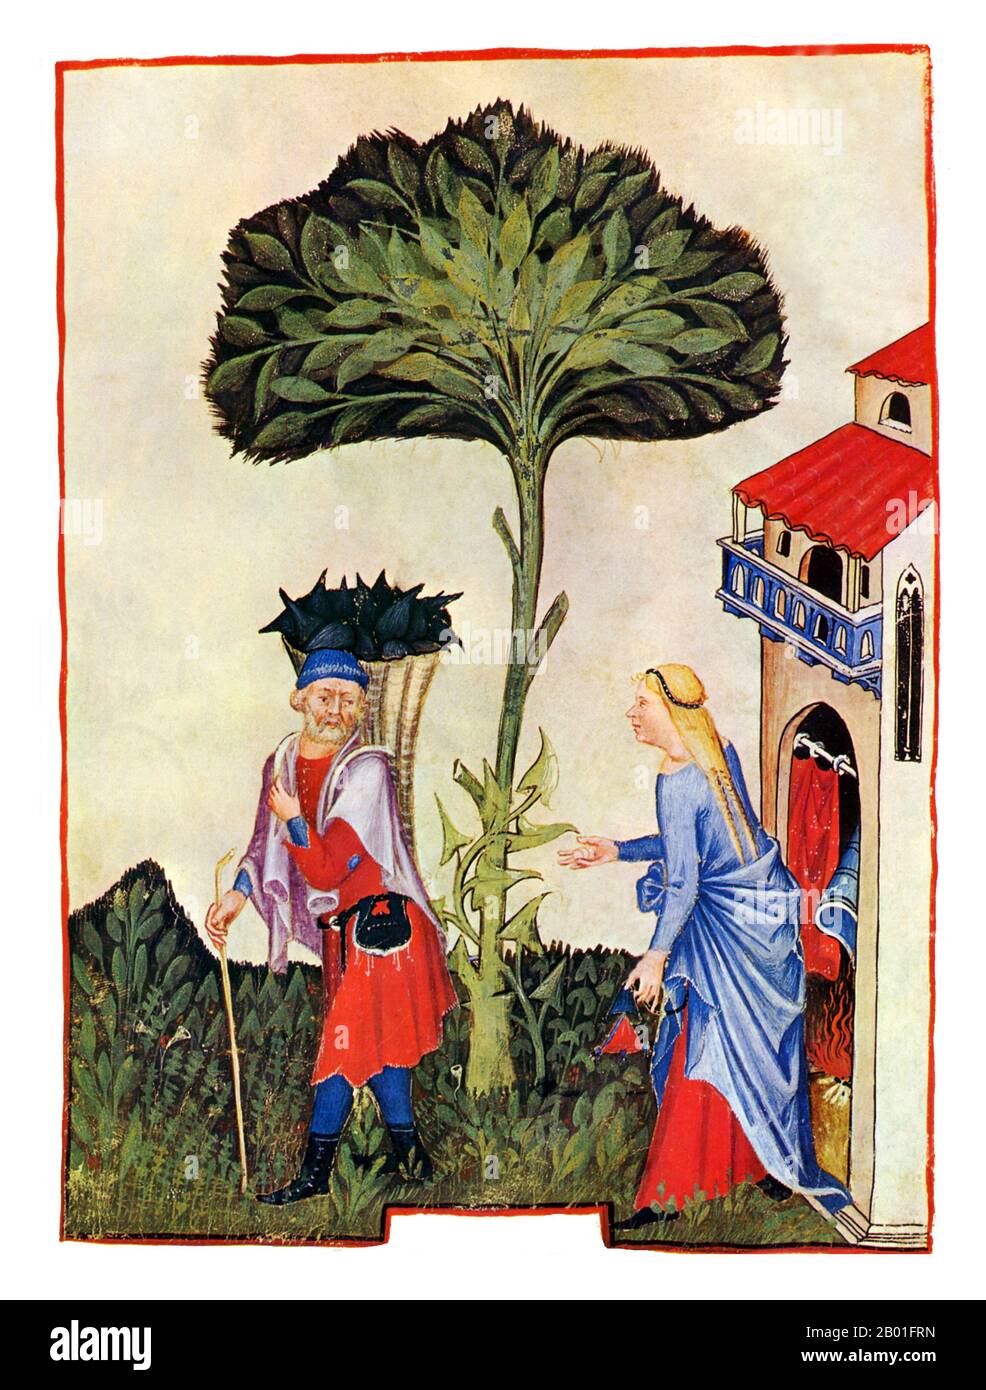 Iraq/Italy: Turnips (Napones). Illustration from Ibn Butlan's Taqwim al-sihha or 'Maintenance of Health' (Baghdad, 11th century), published in Italy as the Tacuinum Sanitatis, 14th century.  The Tacuinum (sometimes Taccuinum) Sanitatis is a medieval handbook on health and well being, based on the Taqwim al‑sihha تقويم الصحة ('Maintenance of Health'), an eleventh-century Arab medical treatise by Ibn Butlan of Baghdad.  Ibn Butlân was a Christian physician born in Baghdad and who died in 1068. Stock Photo